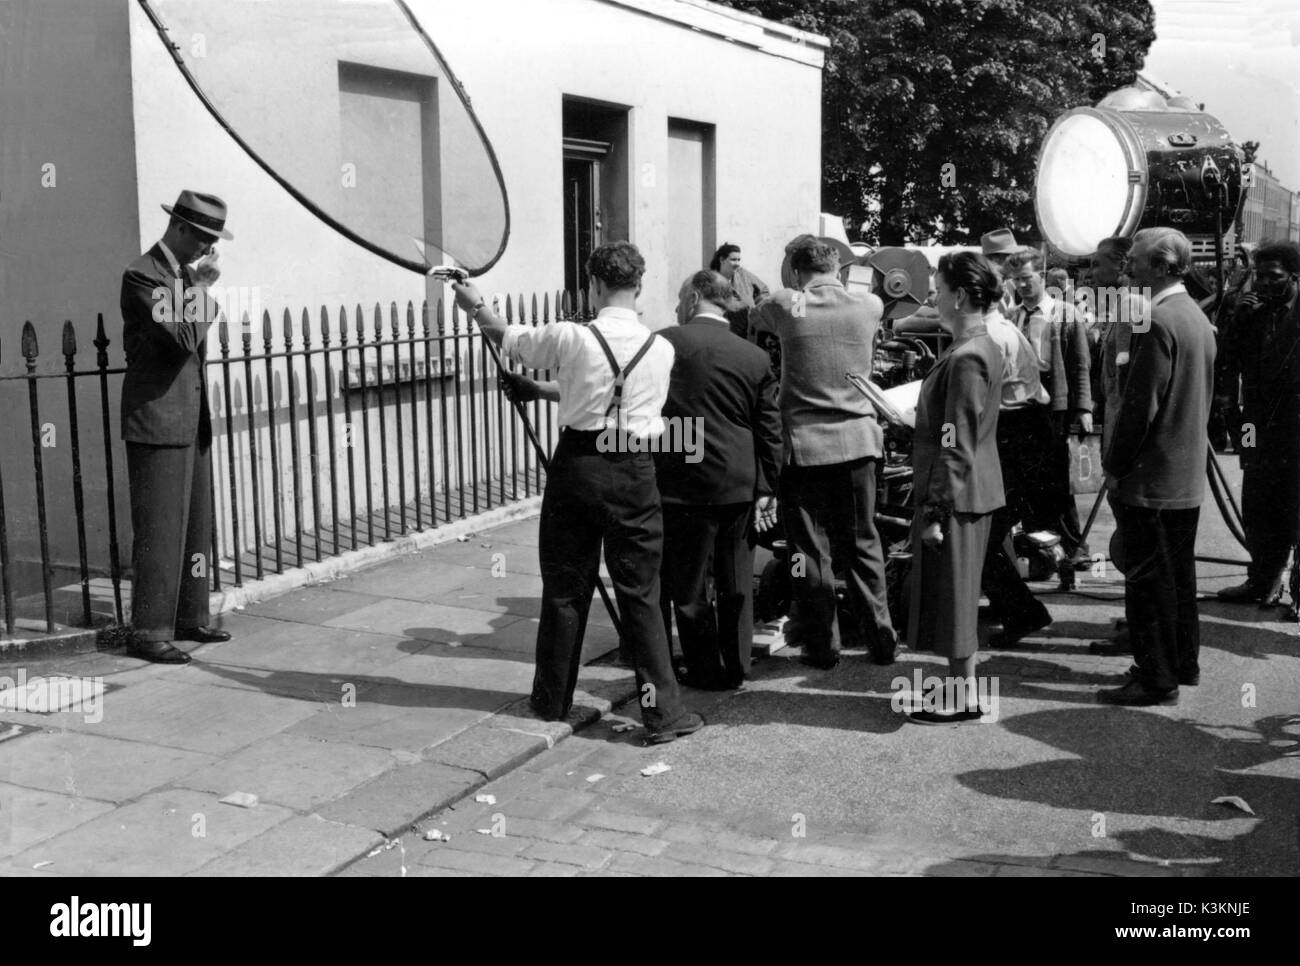 THE MAN WHO KNEW TOO MUCH  On location in Camden Town, London, leading actor JAMES STEWART , Director ALFRED HITCHCOCK [immediately right of man in white shirt and braces], and Technical Advisor CONSTANCE WILLIS [standing, centre right], and beyond her can be glimpsed the Technicolor camera        Date: 1956 Stock Photo